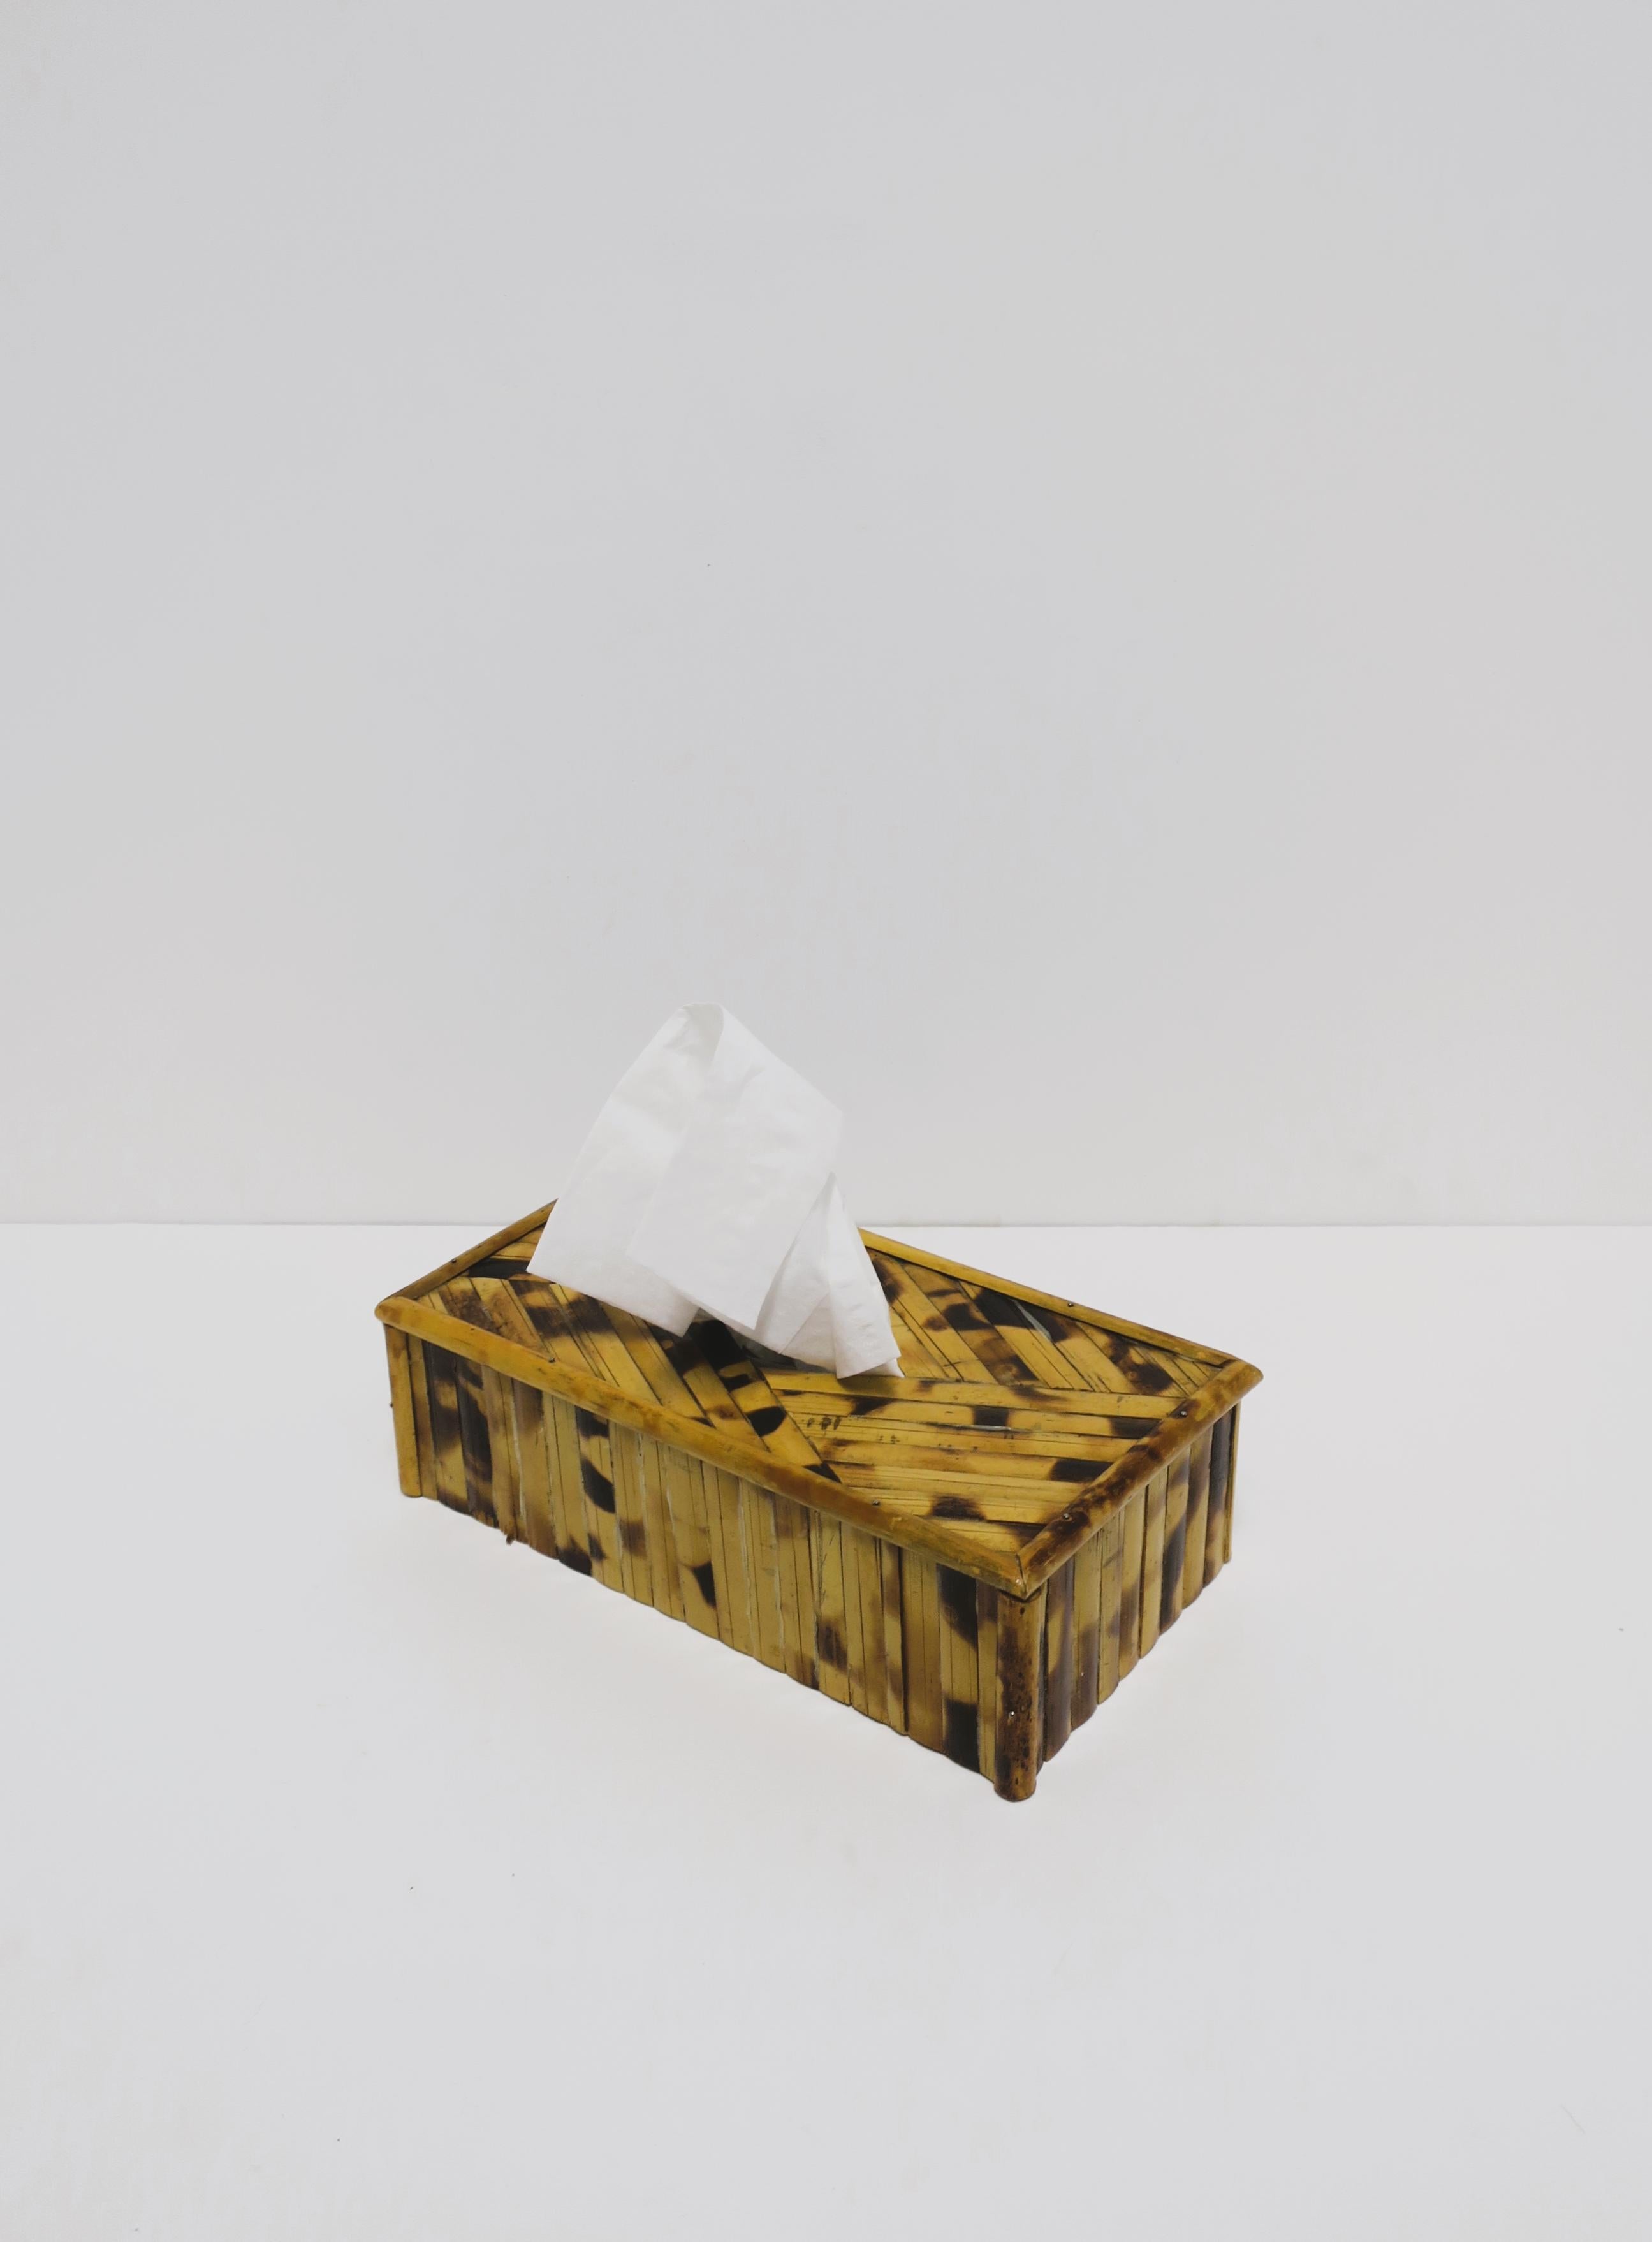 Asian Wicker Bamboo Tissue Box Cover Holder For Sale